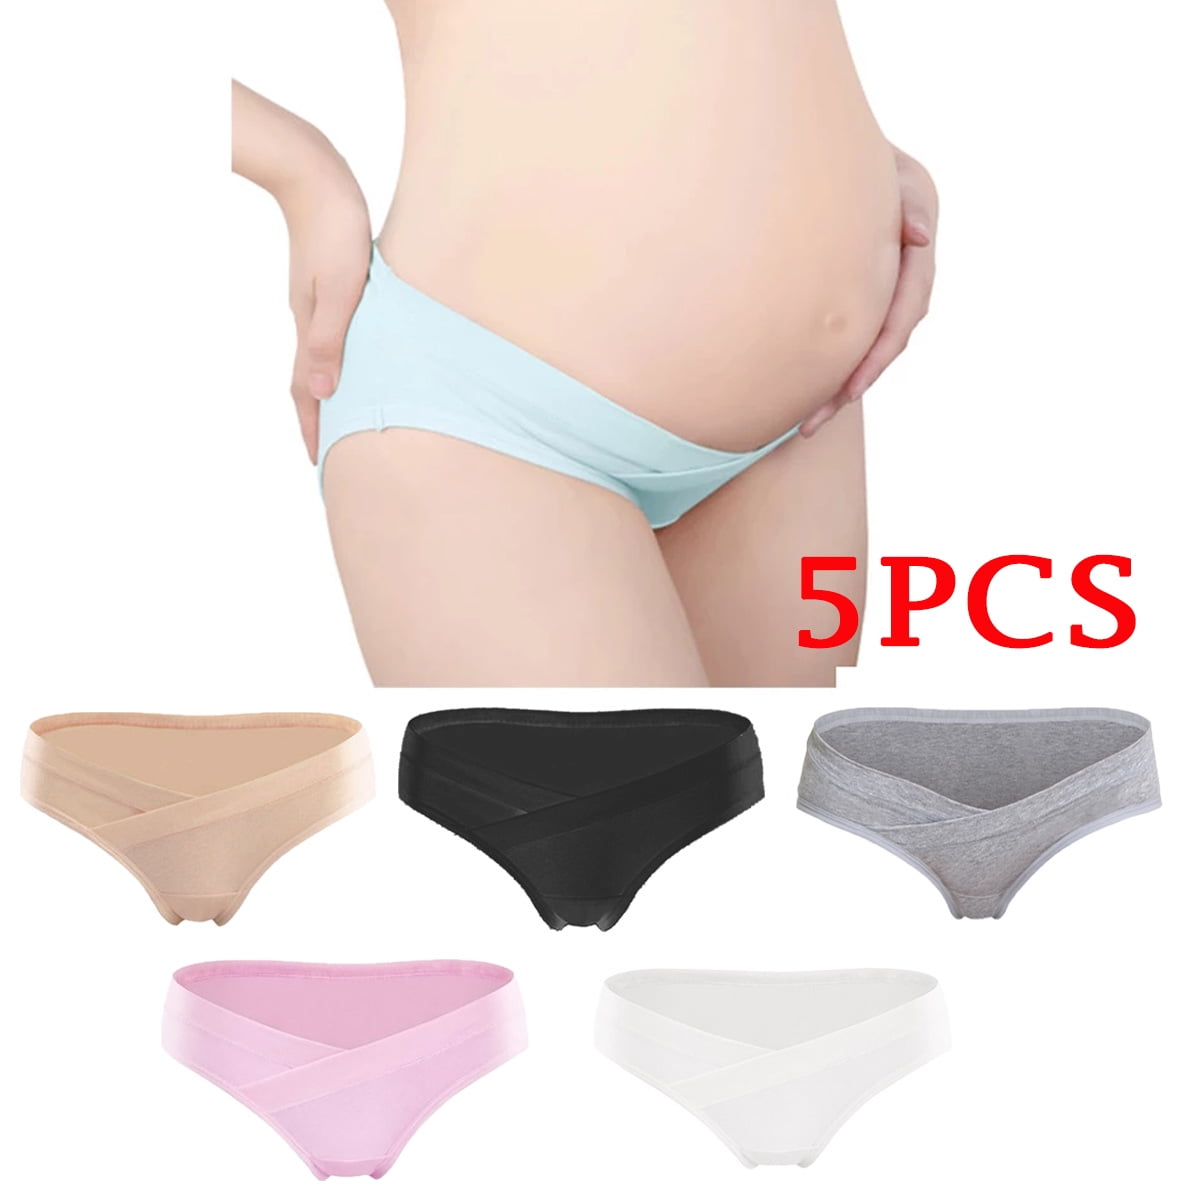 5Pieces Pregnant Women Cotton Breathable Maternity Underwear Belly Support Panties  U Shape Low Waist Panties 